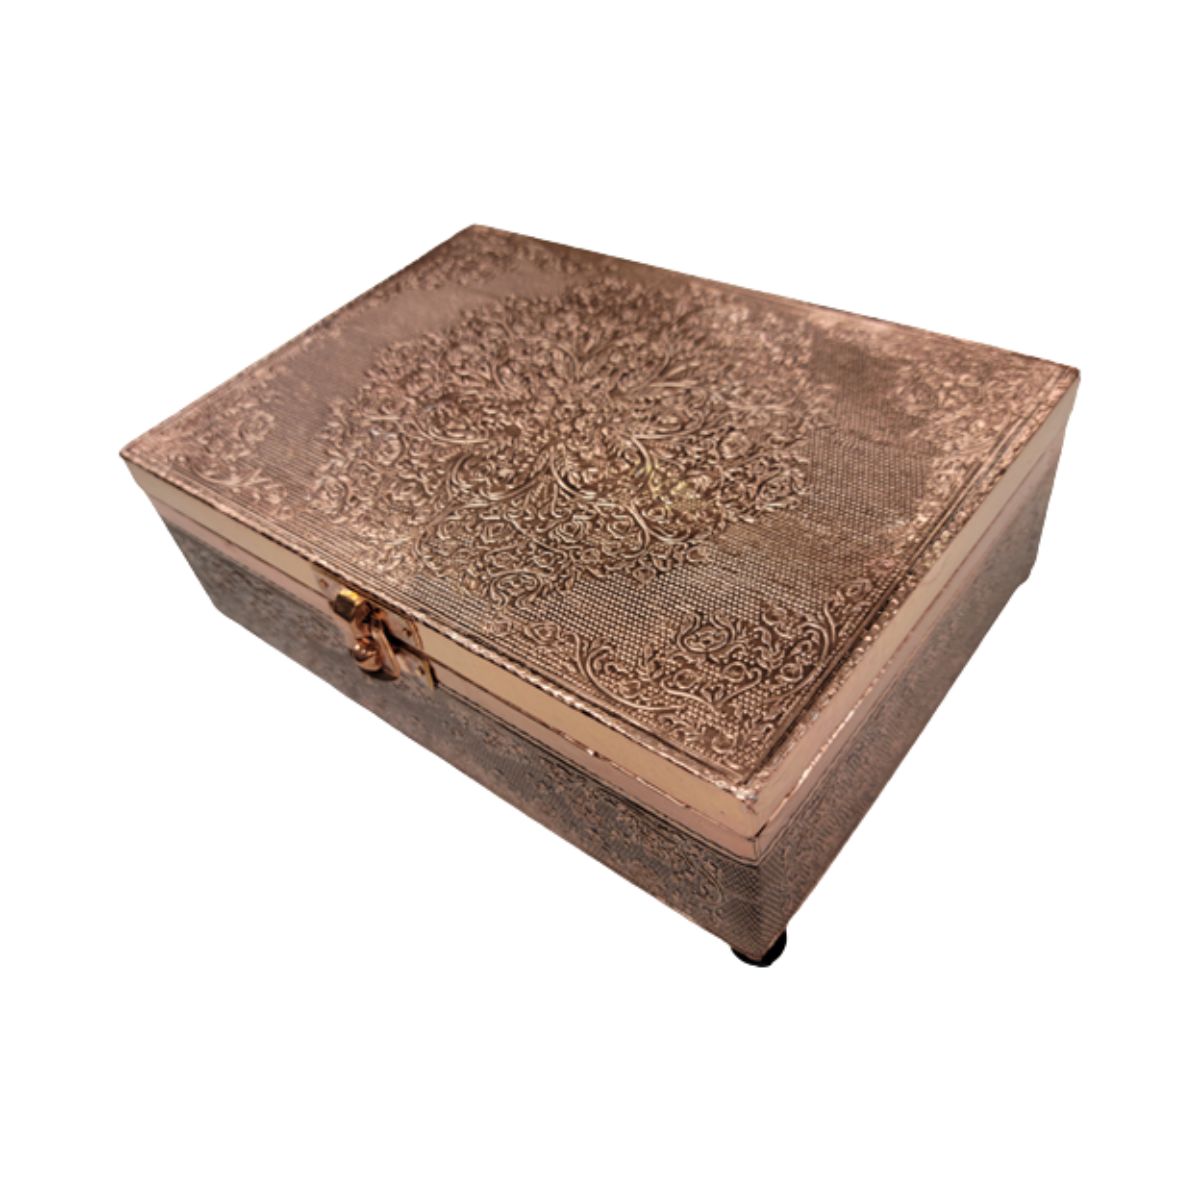 Copper Plated Box- Flower